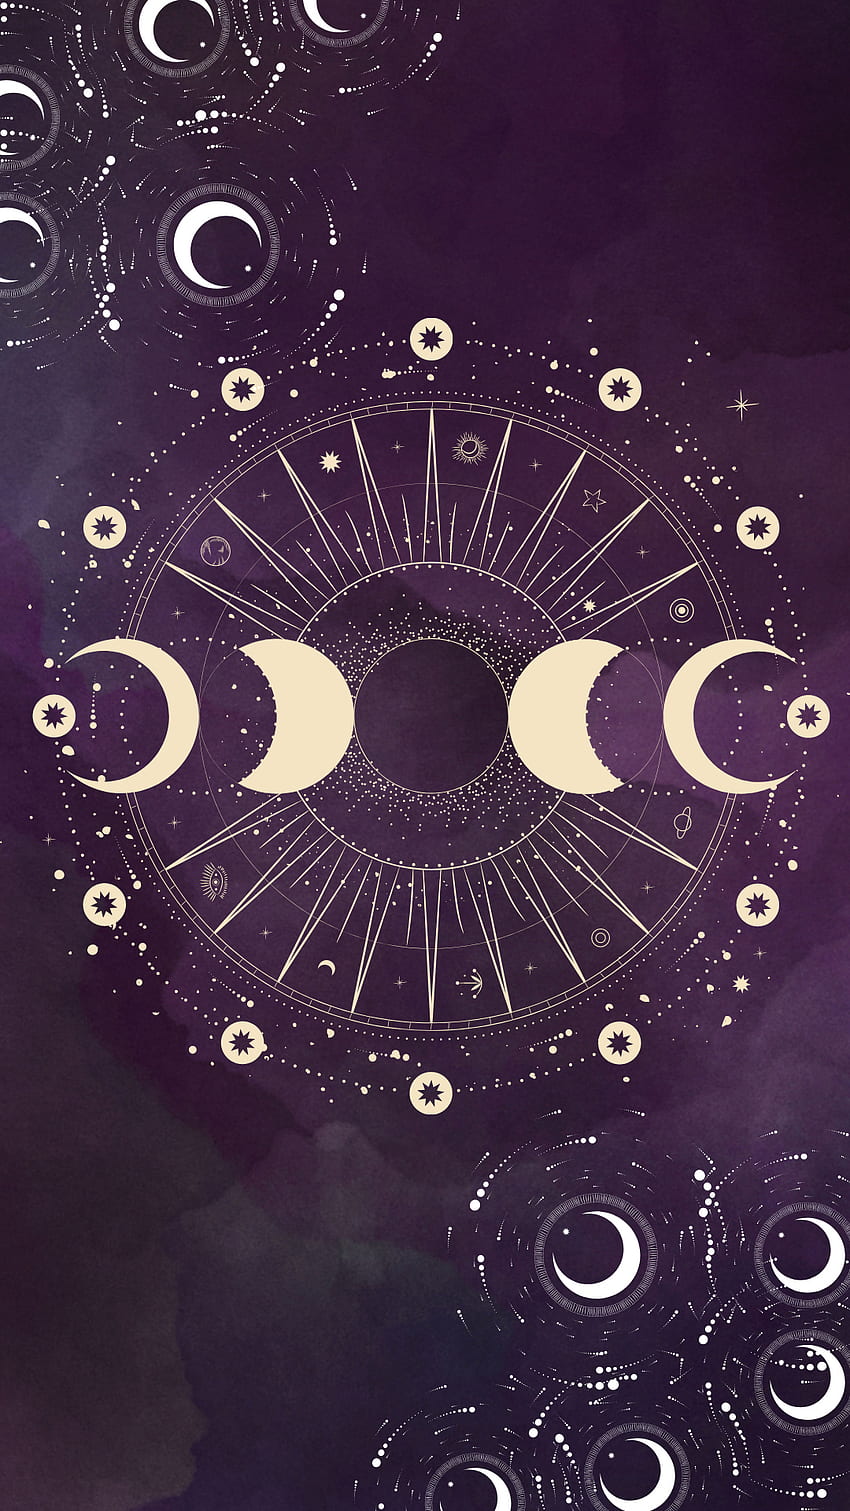 A purple and white watercolor wallpaper design with a circular pattern of moons and stars. - Moon phases